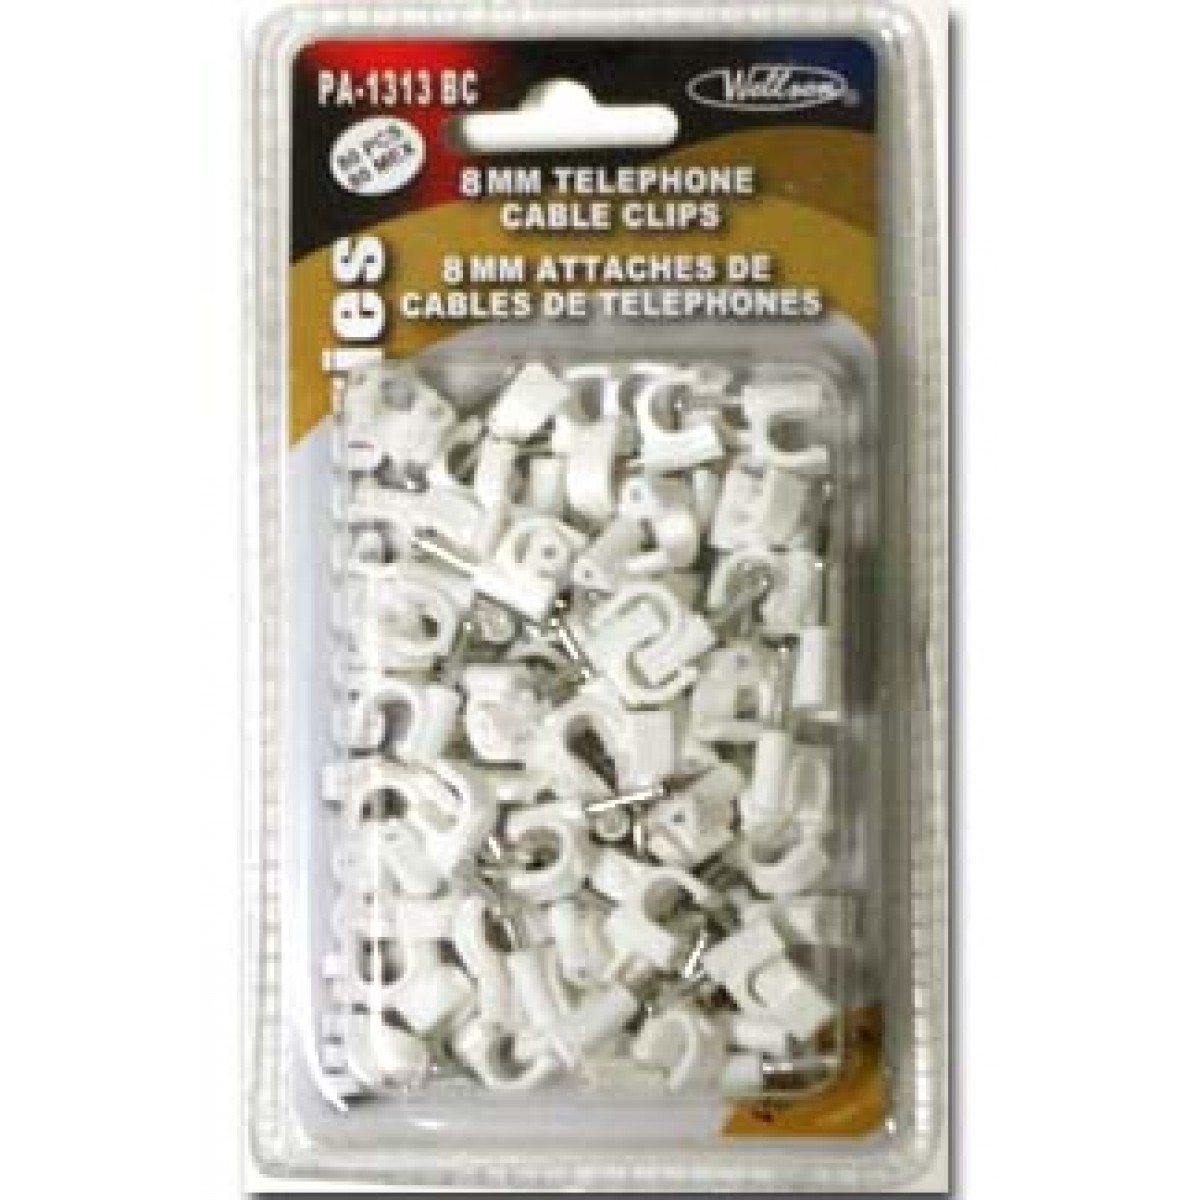 Wellson 8mm telephone cable clips white - 80pcs - PA-1313 BC